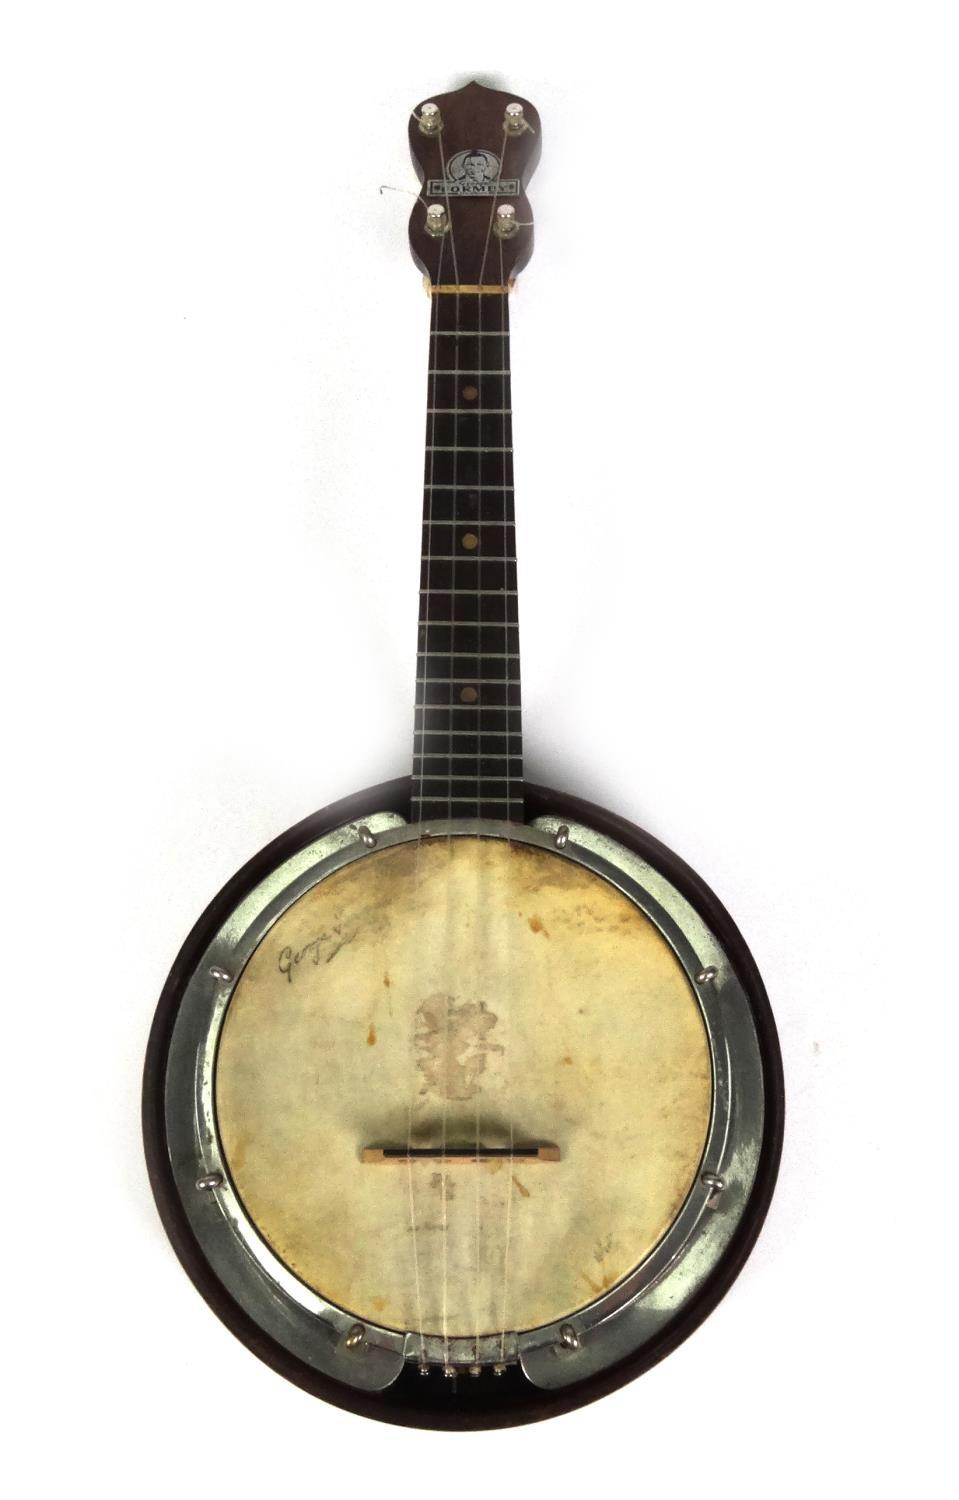 George Formby banjo, numbered 4508 to back, 56cm long